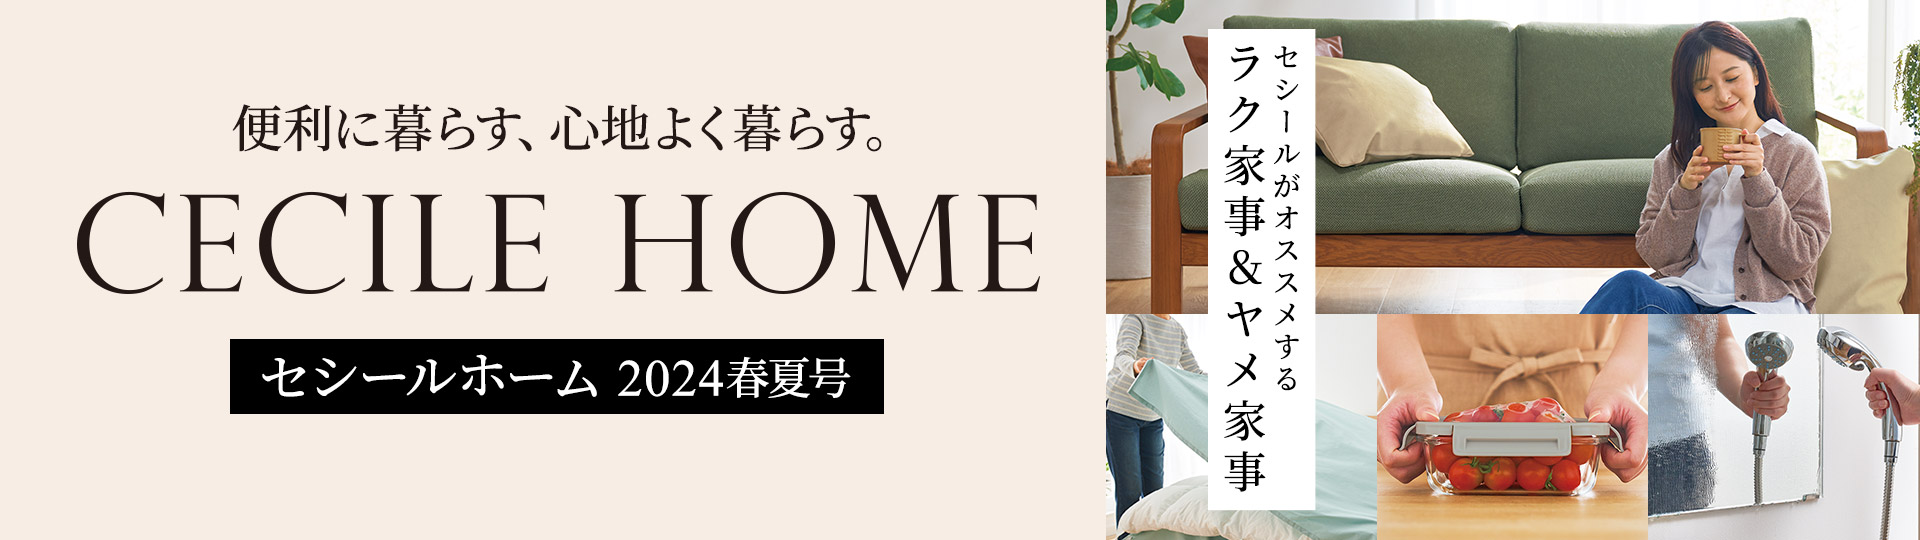 CECILE HOME カタログ